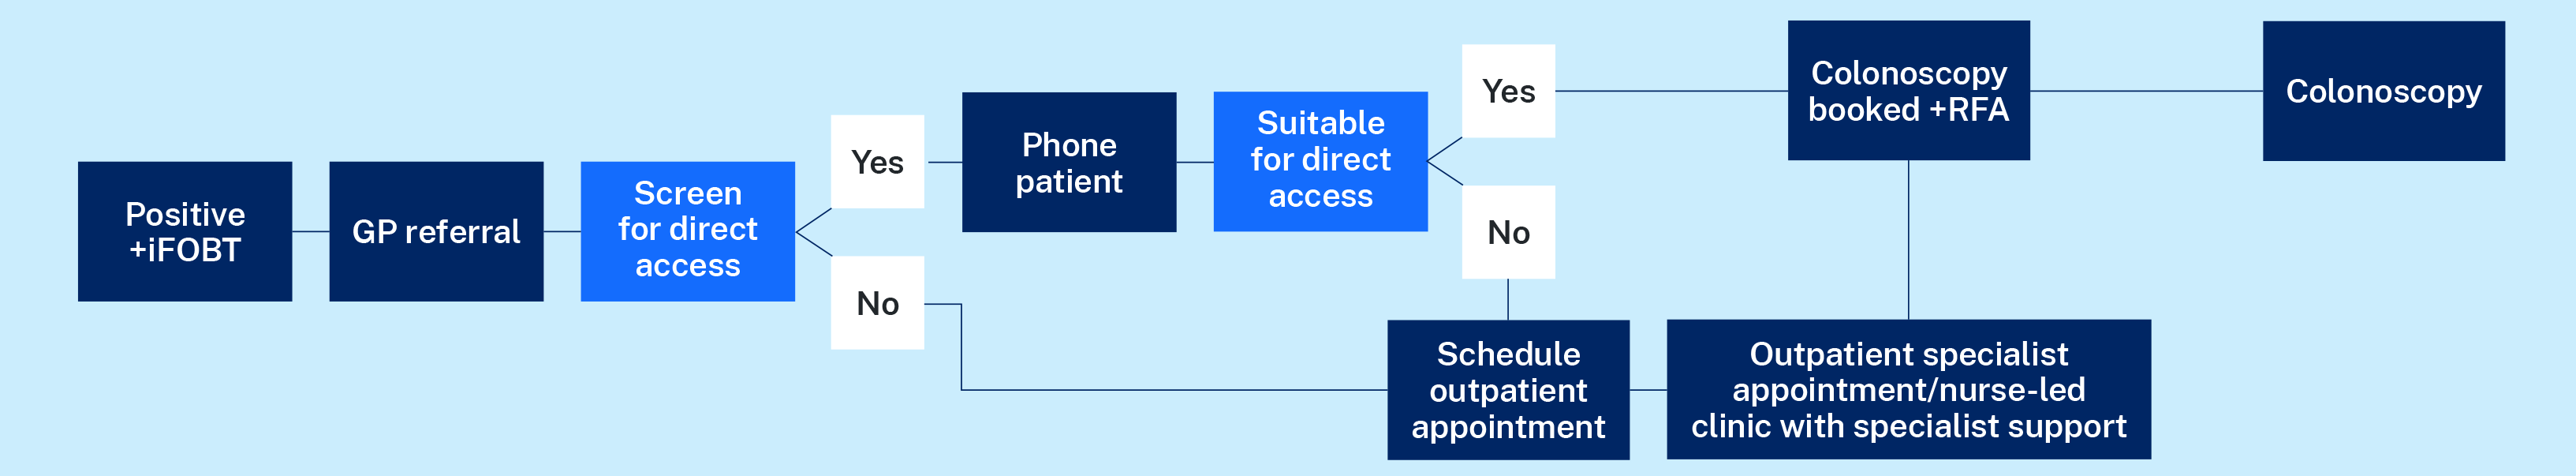 Direct access pathway for positive iFOBT